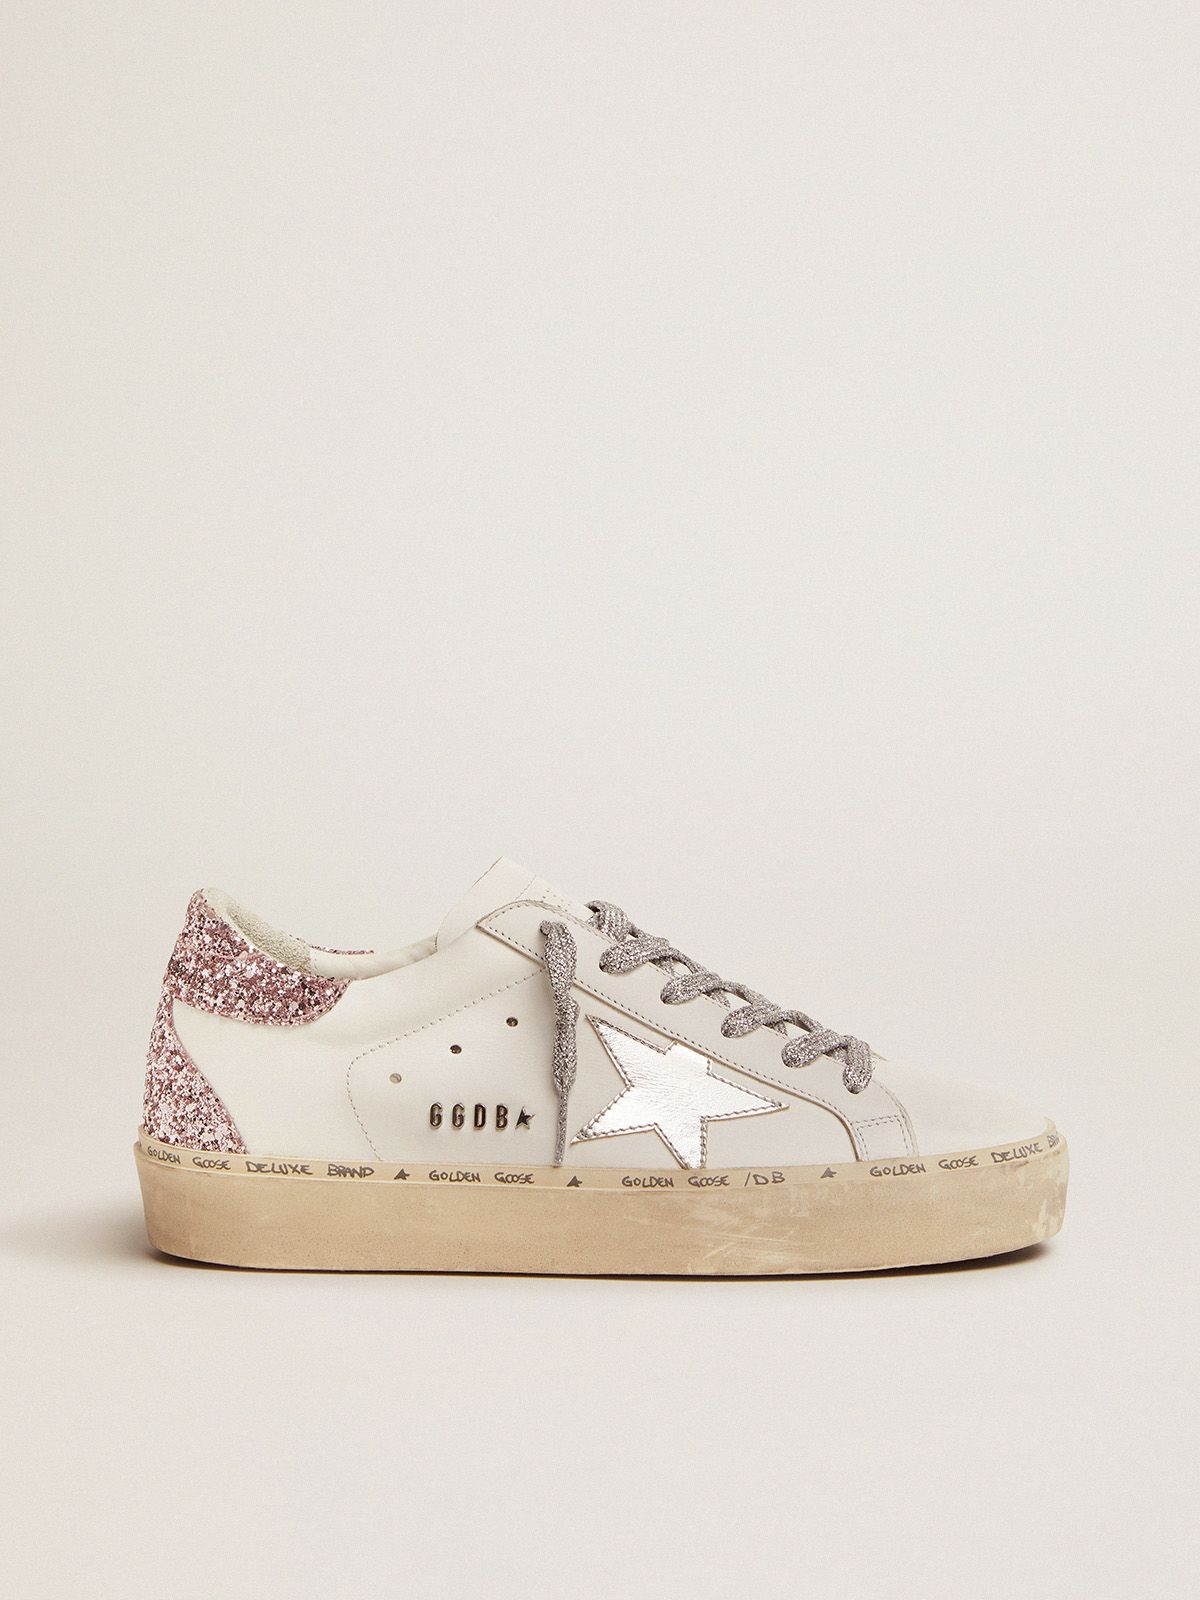 golden goose Hi leather silver and star Star sneakers quartz-pink with glitter tab laminated heel